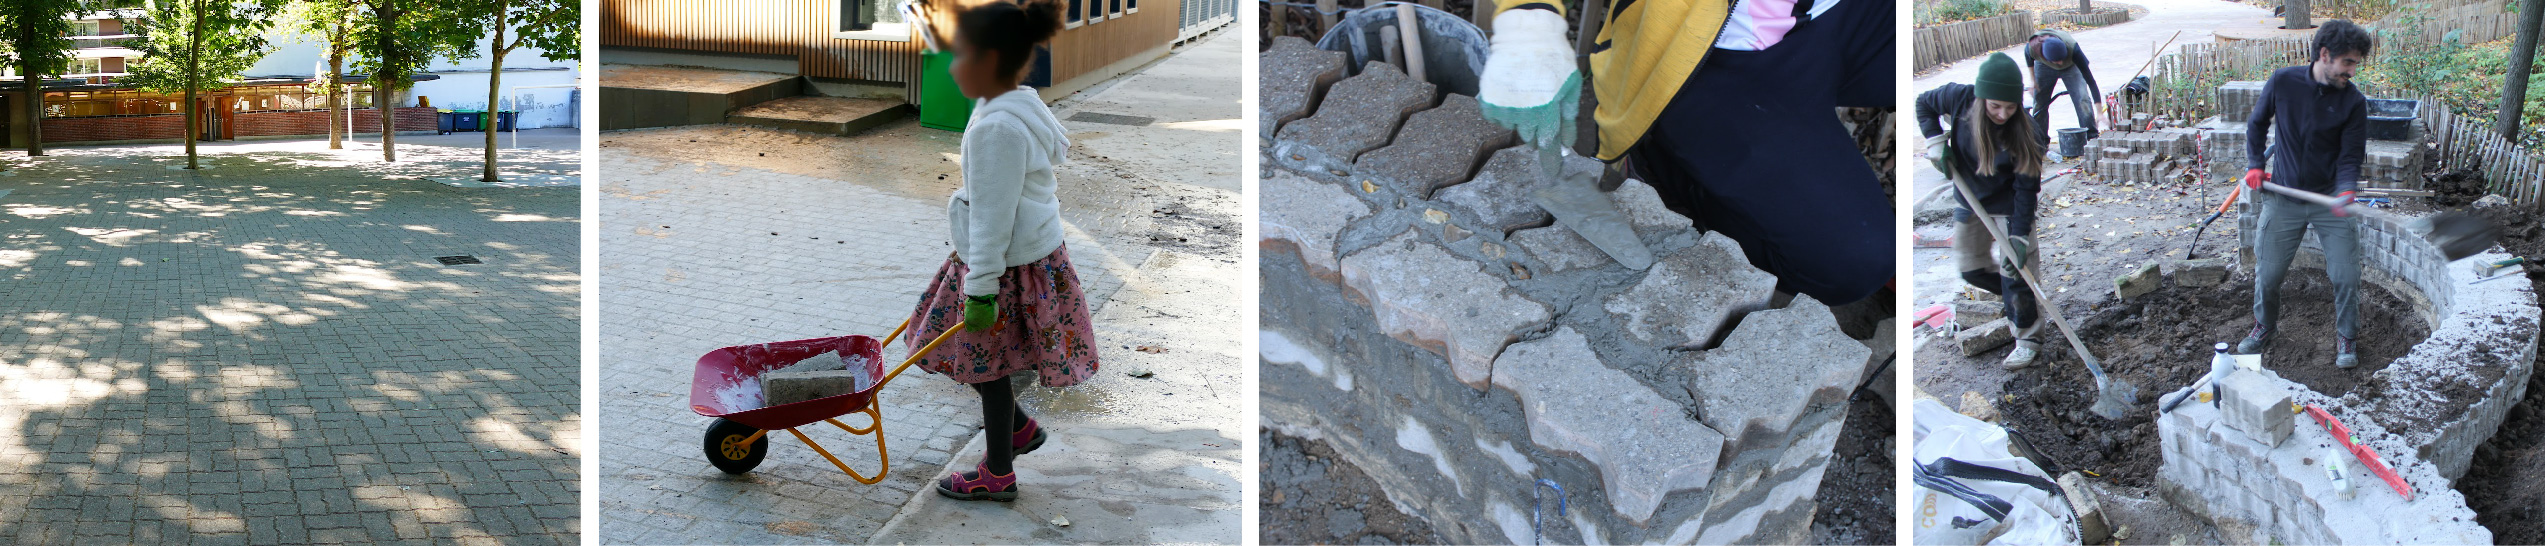 Reusing the old paving stones